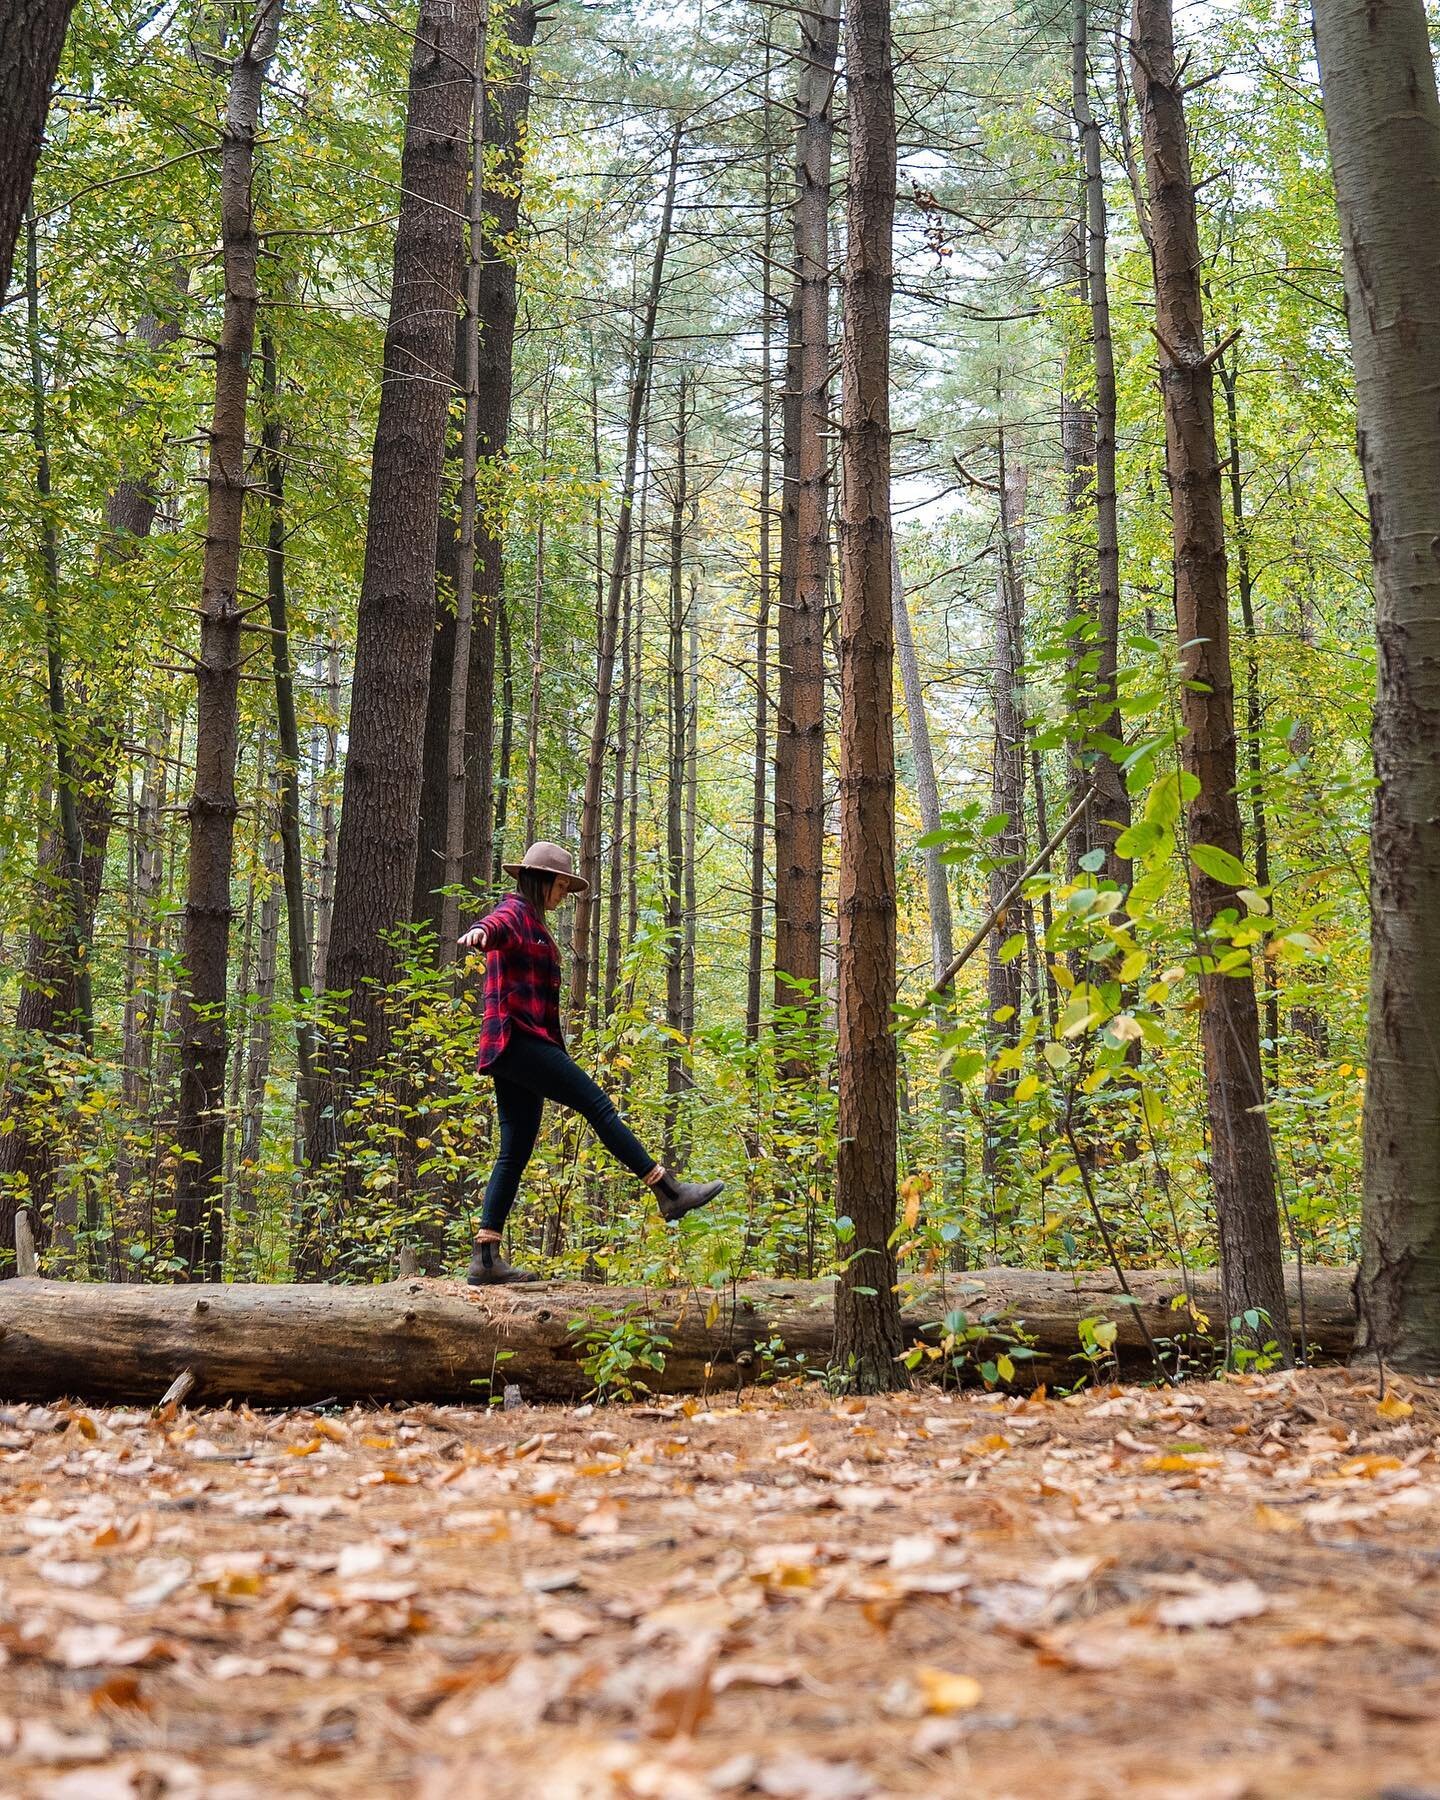 Exploring new trails, parks, and preserves on Long Island. The hikes at Prosser Pines Nature Preserve, David Weld Sanctuary, and Cold Spring Harbor State park are must sees in Suffolk County! Pro tip, pack a blanket and eat lunch on the beach after s